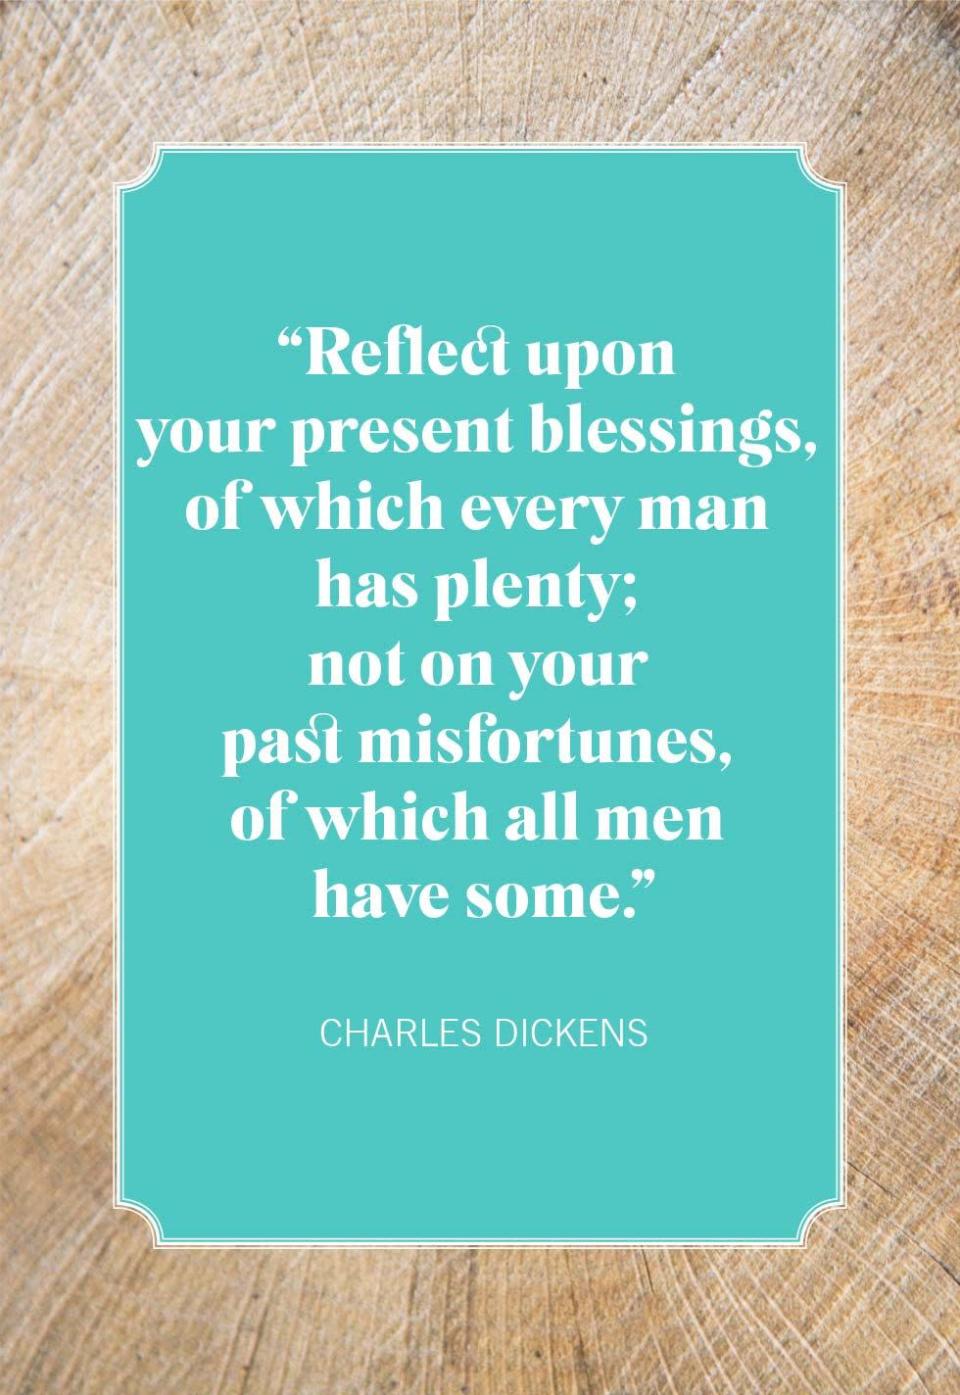 <p>"Reflect upon your present blessings, of which every man has plenty; not on your past misfortunes, of which all men have some."</p>